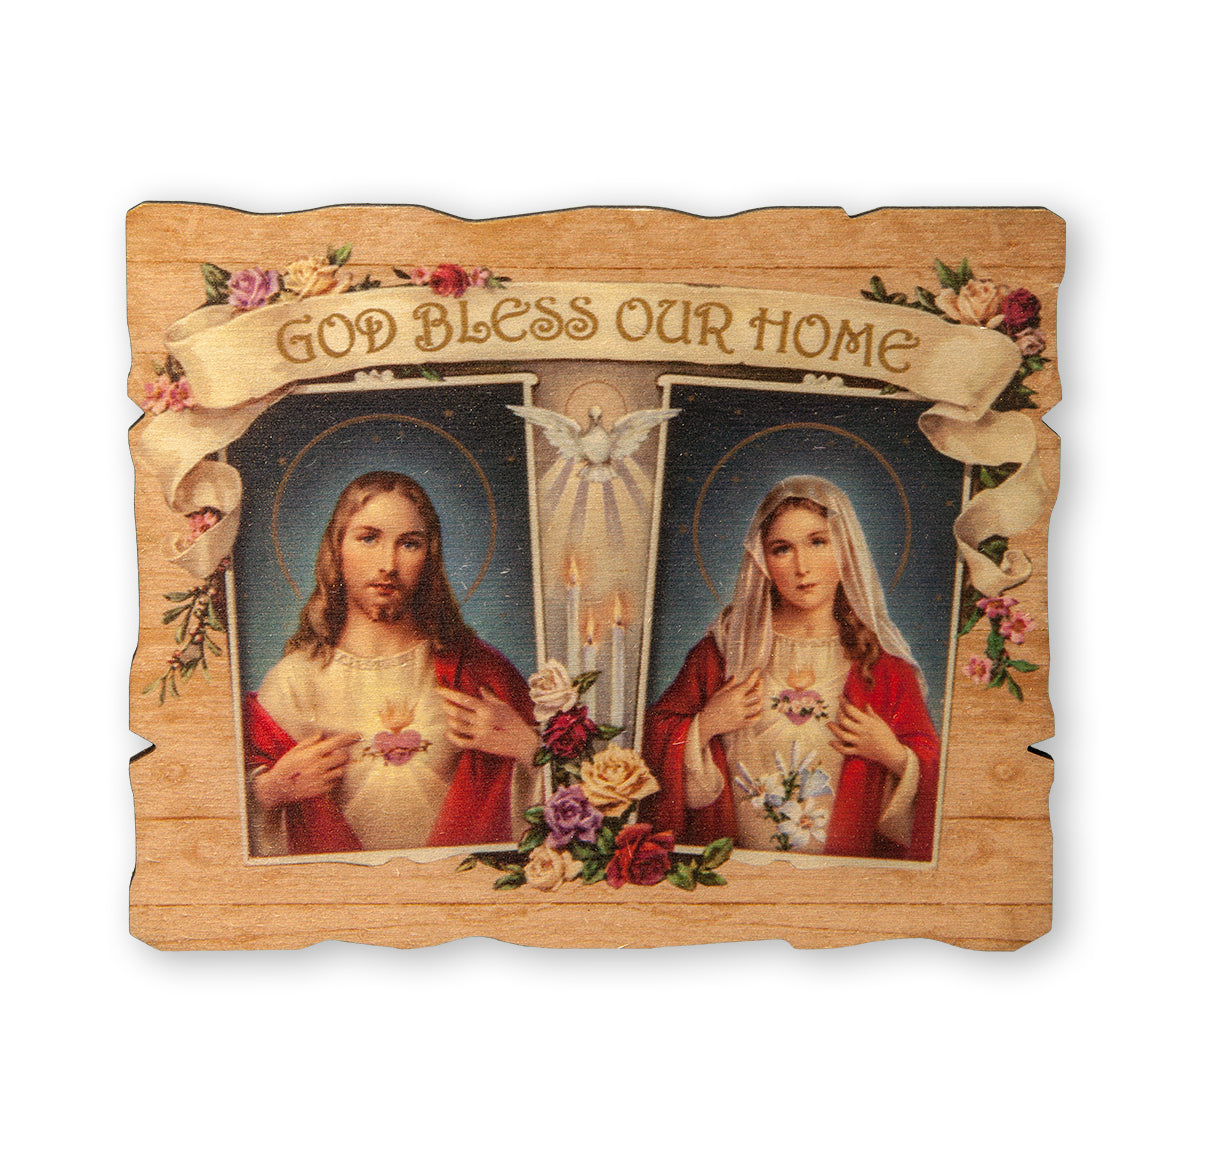 The Sacred Hearts Wood Wall Plaque